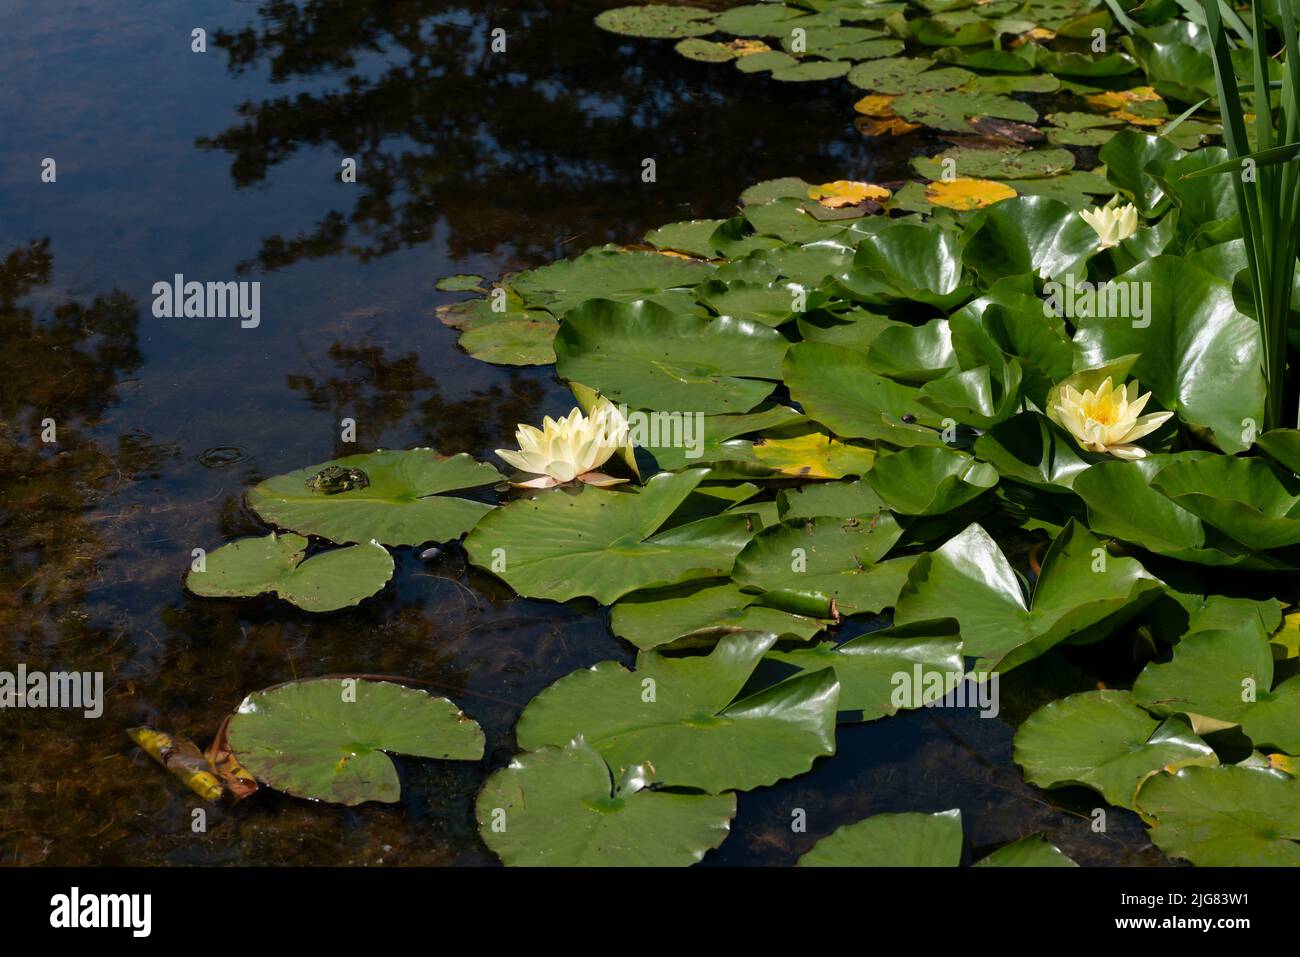 Water lily flowers with green leaves in a pond, a green frog sitting in the sun on a leaf Stock Photo